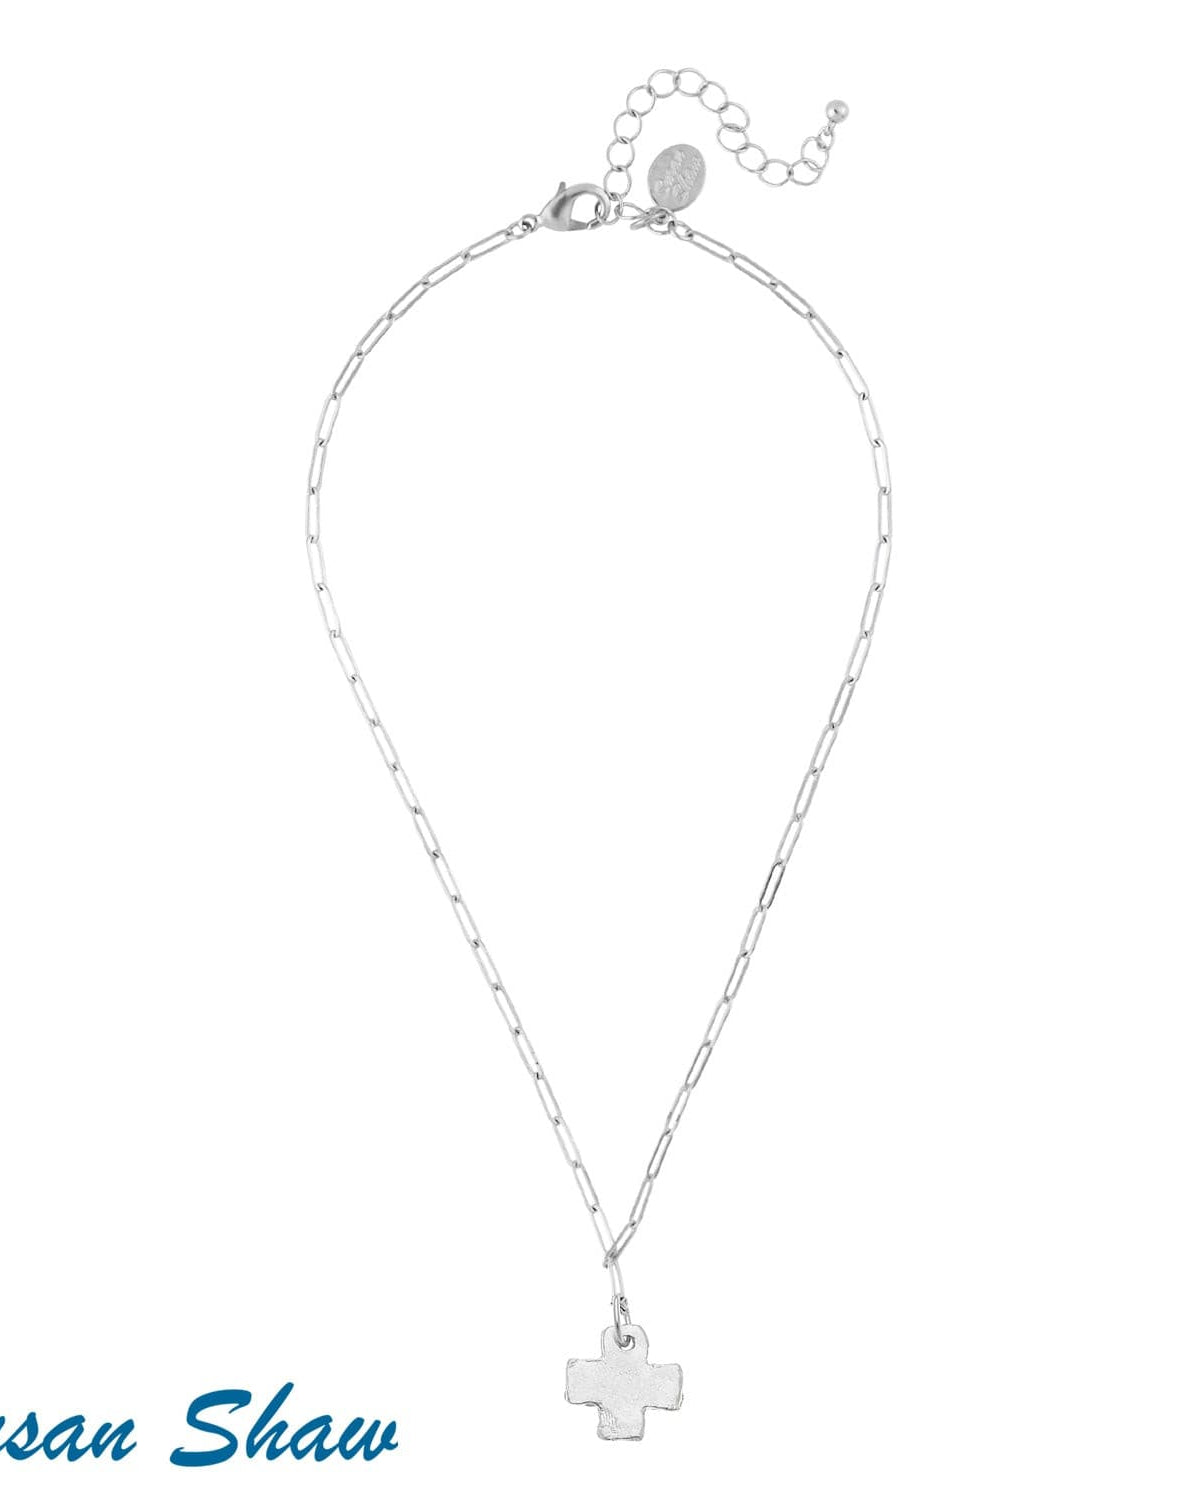 Susan Shaw Cross Paperclip Necklace (Silver).